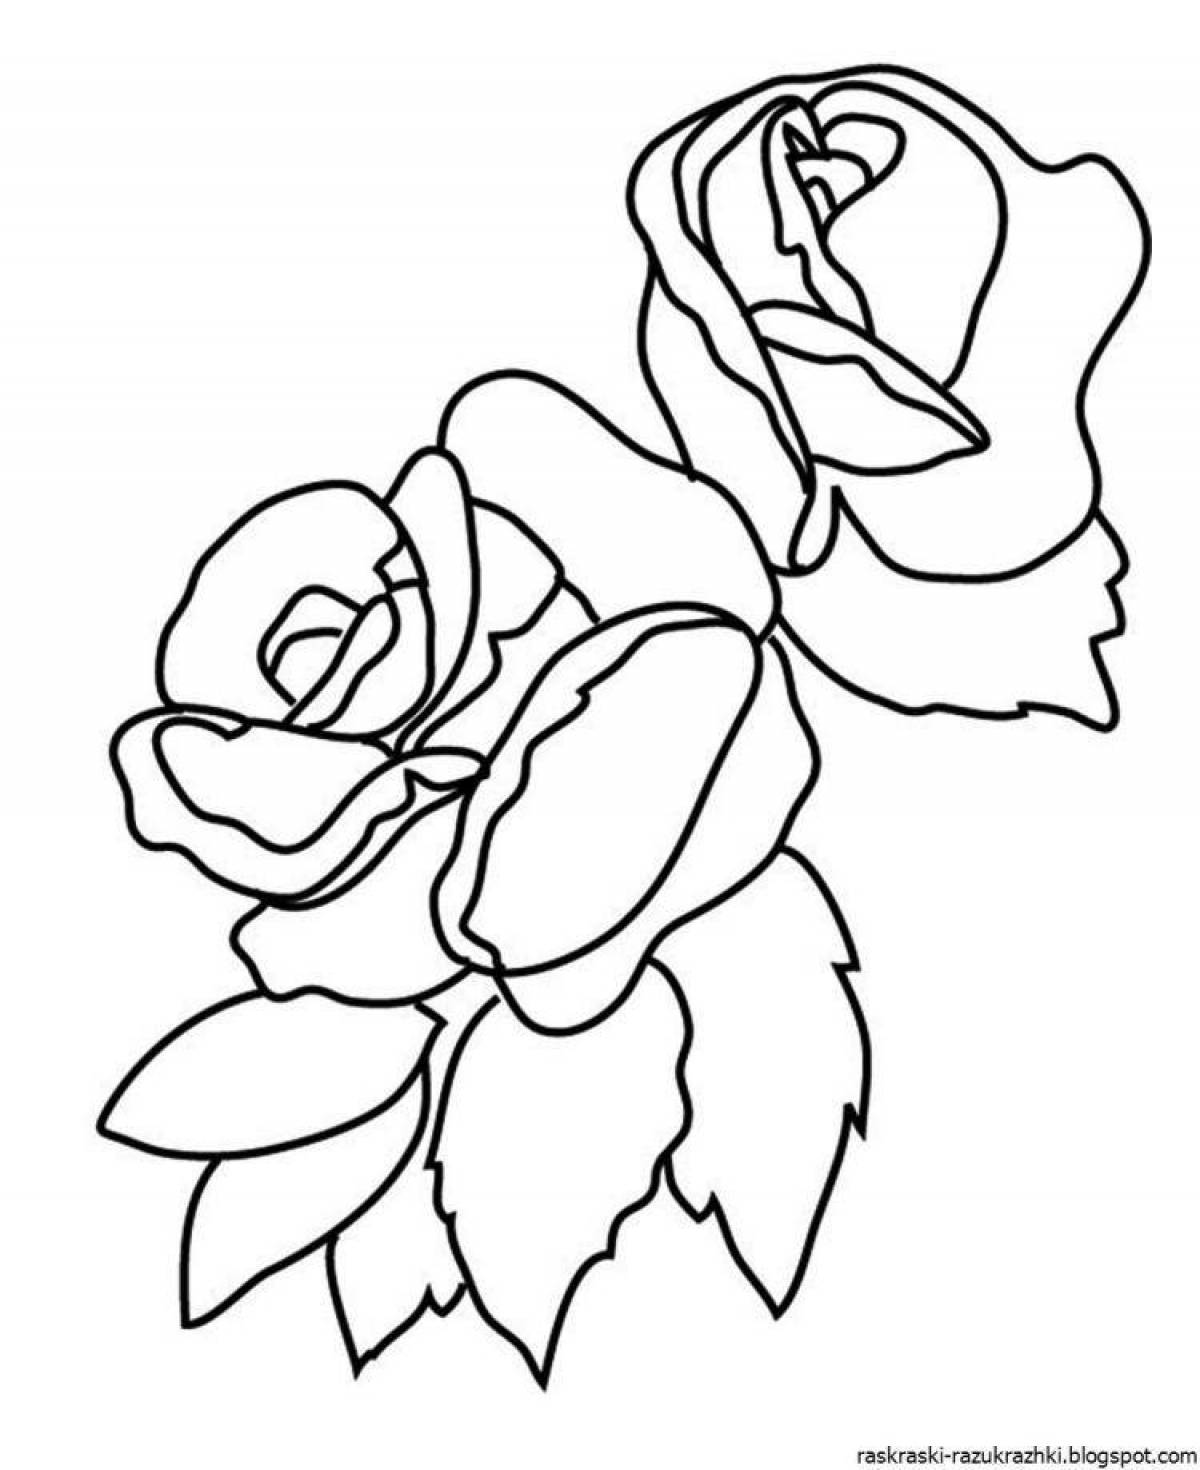 Amazing rose flower coloring book